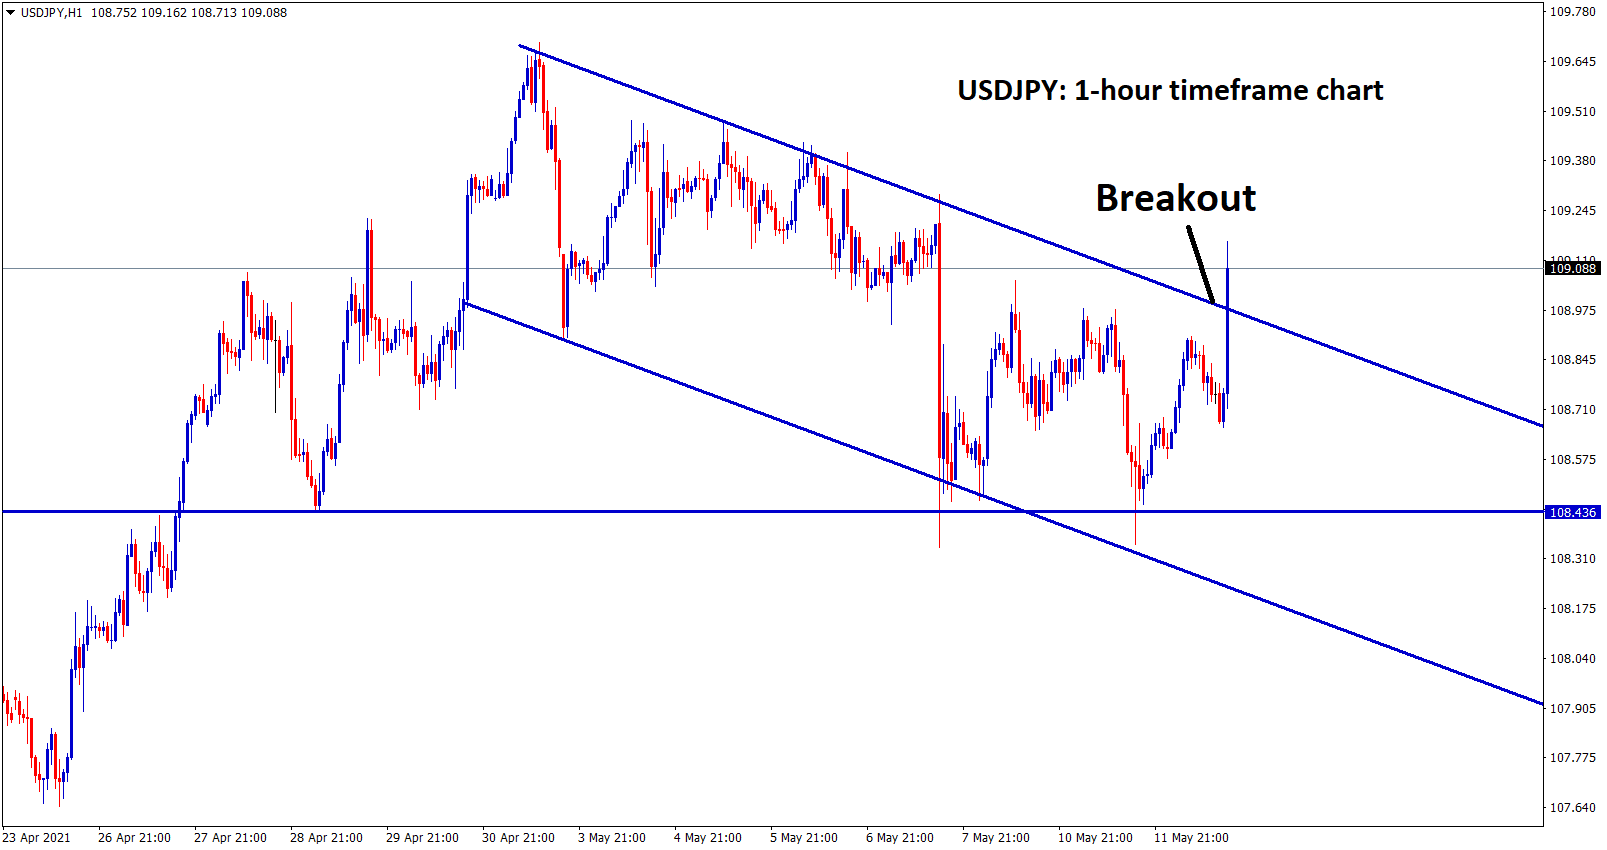 USDJPY breakout the top level of the descending channel in the h1 chart